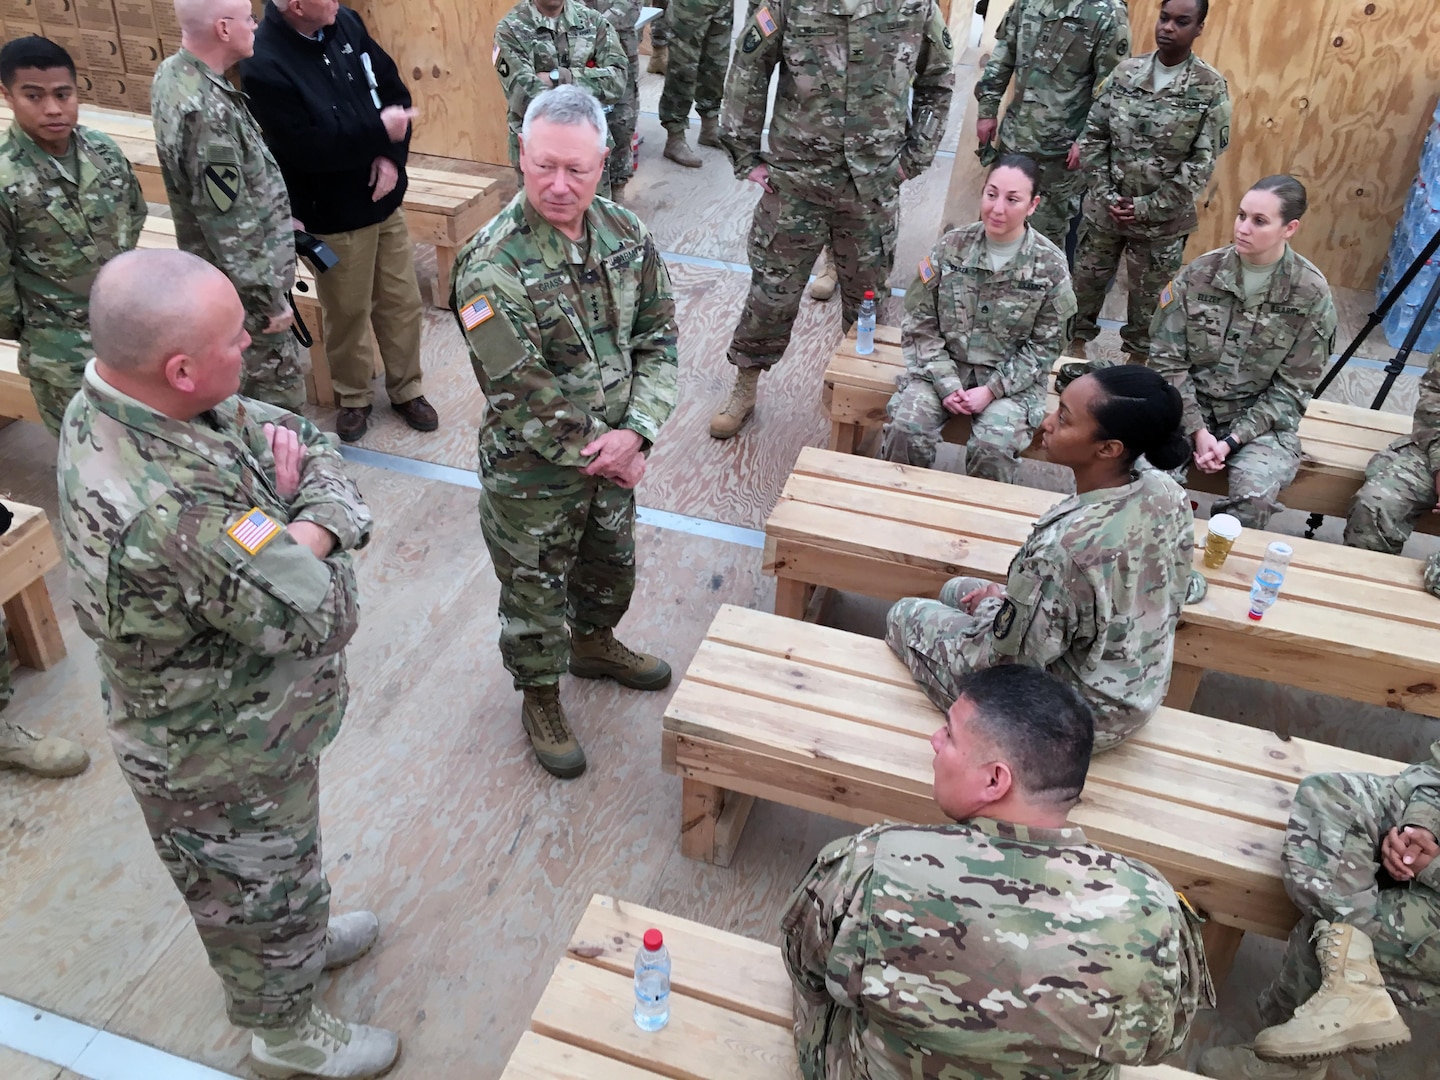 Army Gen. Frank Grass, chief, National Guard Bureau, center, and Air Force Chief Master Sgt. Mitchell Brush, his senior enlisted advisor, left, talk with Texas National Guard members serving at MK Air Base, Romania, in support of Operation Atlantic Resolve and other missions, Nov. 28, 2015. This image was acquired using a cellular phone. 